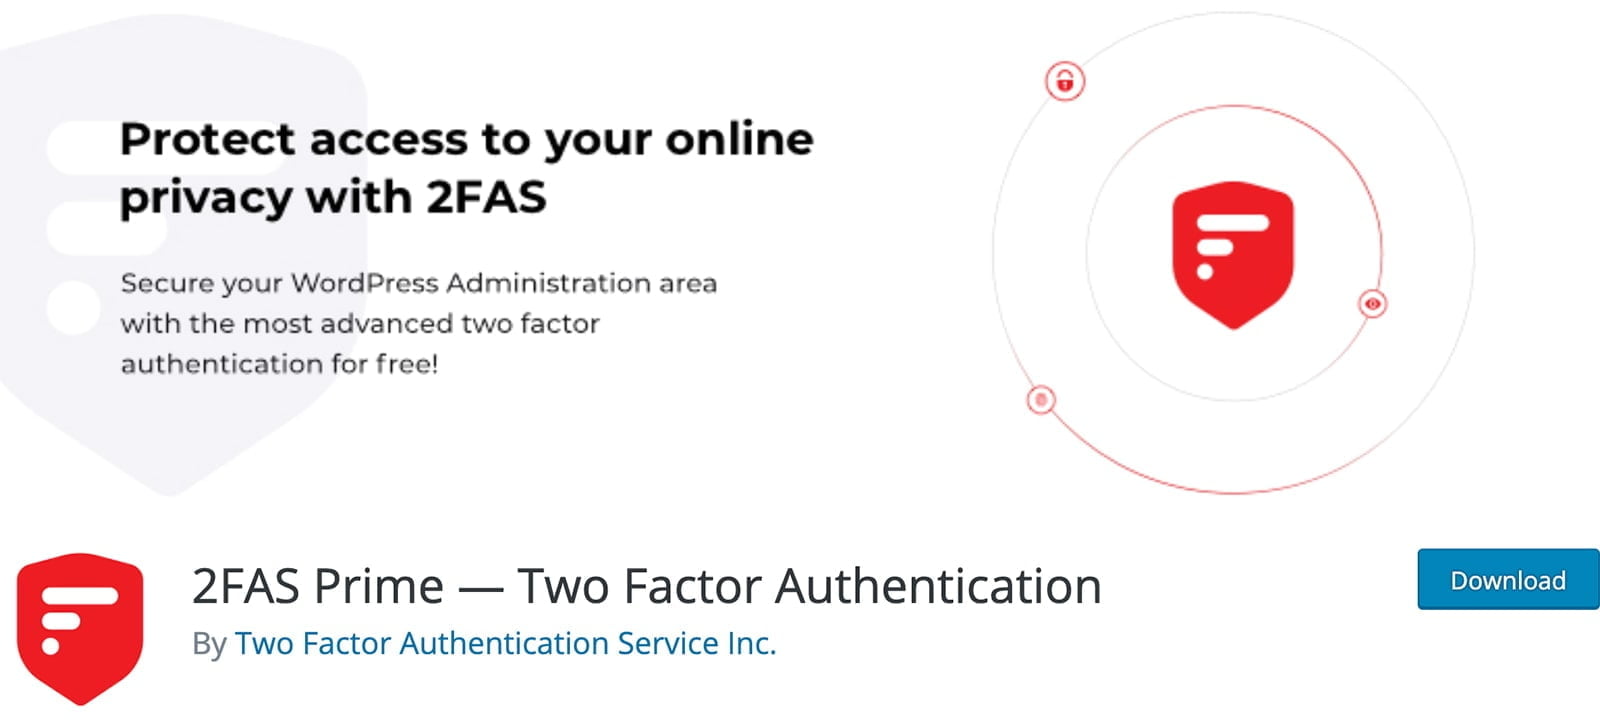 2FAS Prime - Two Factor Authenticator